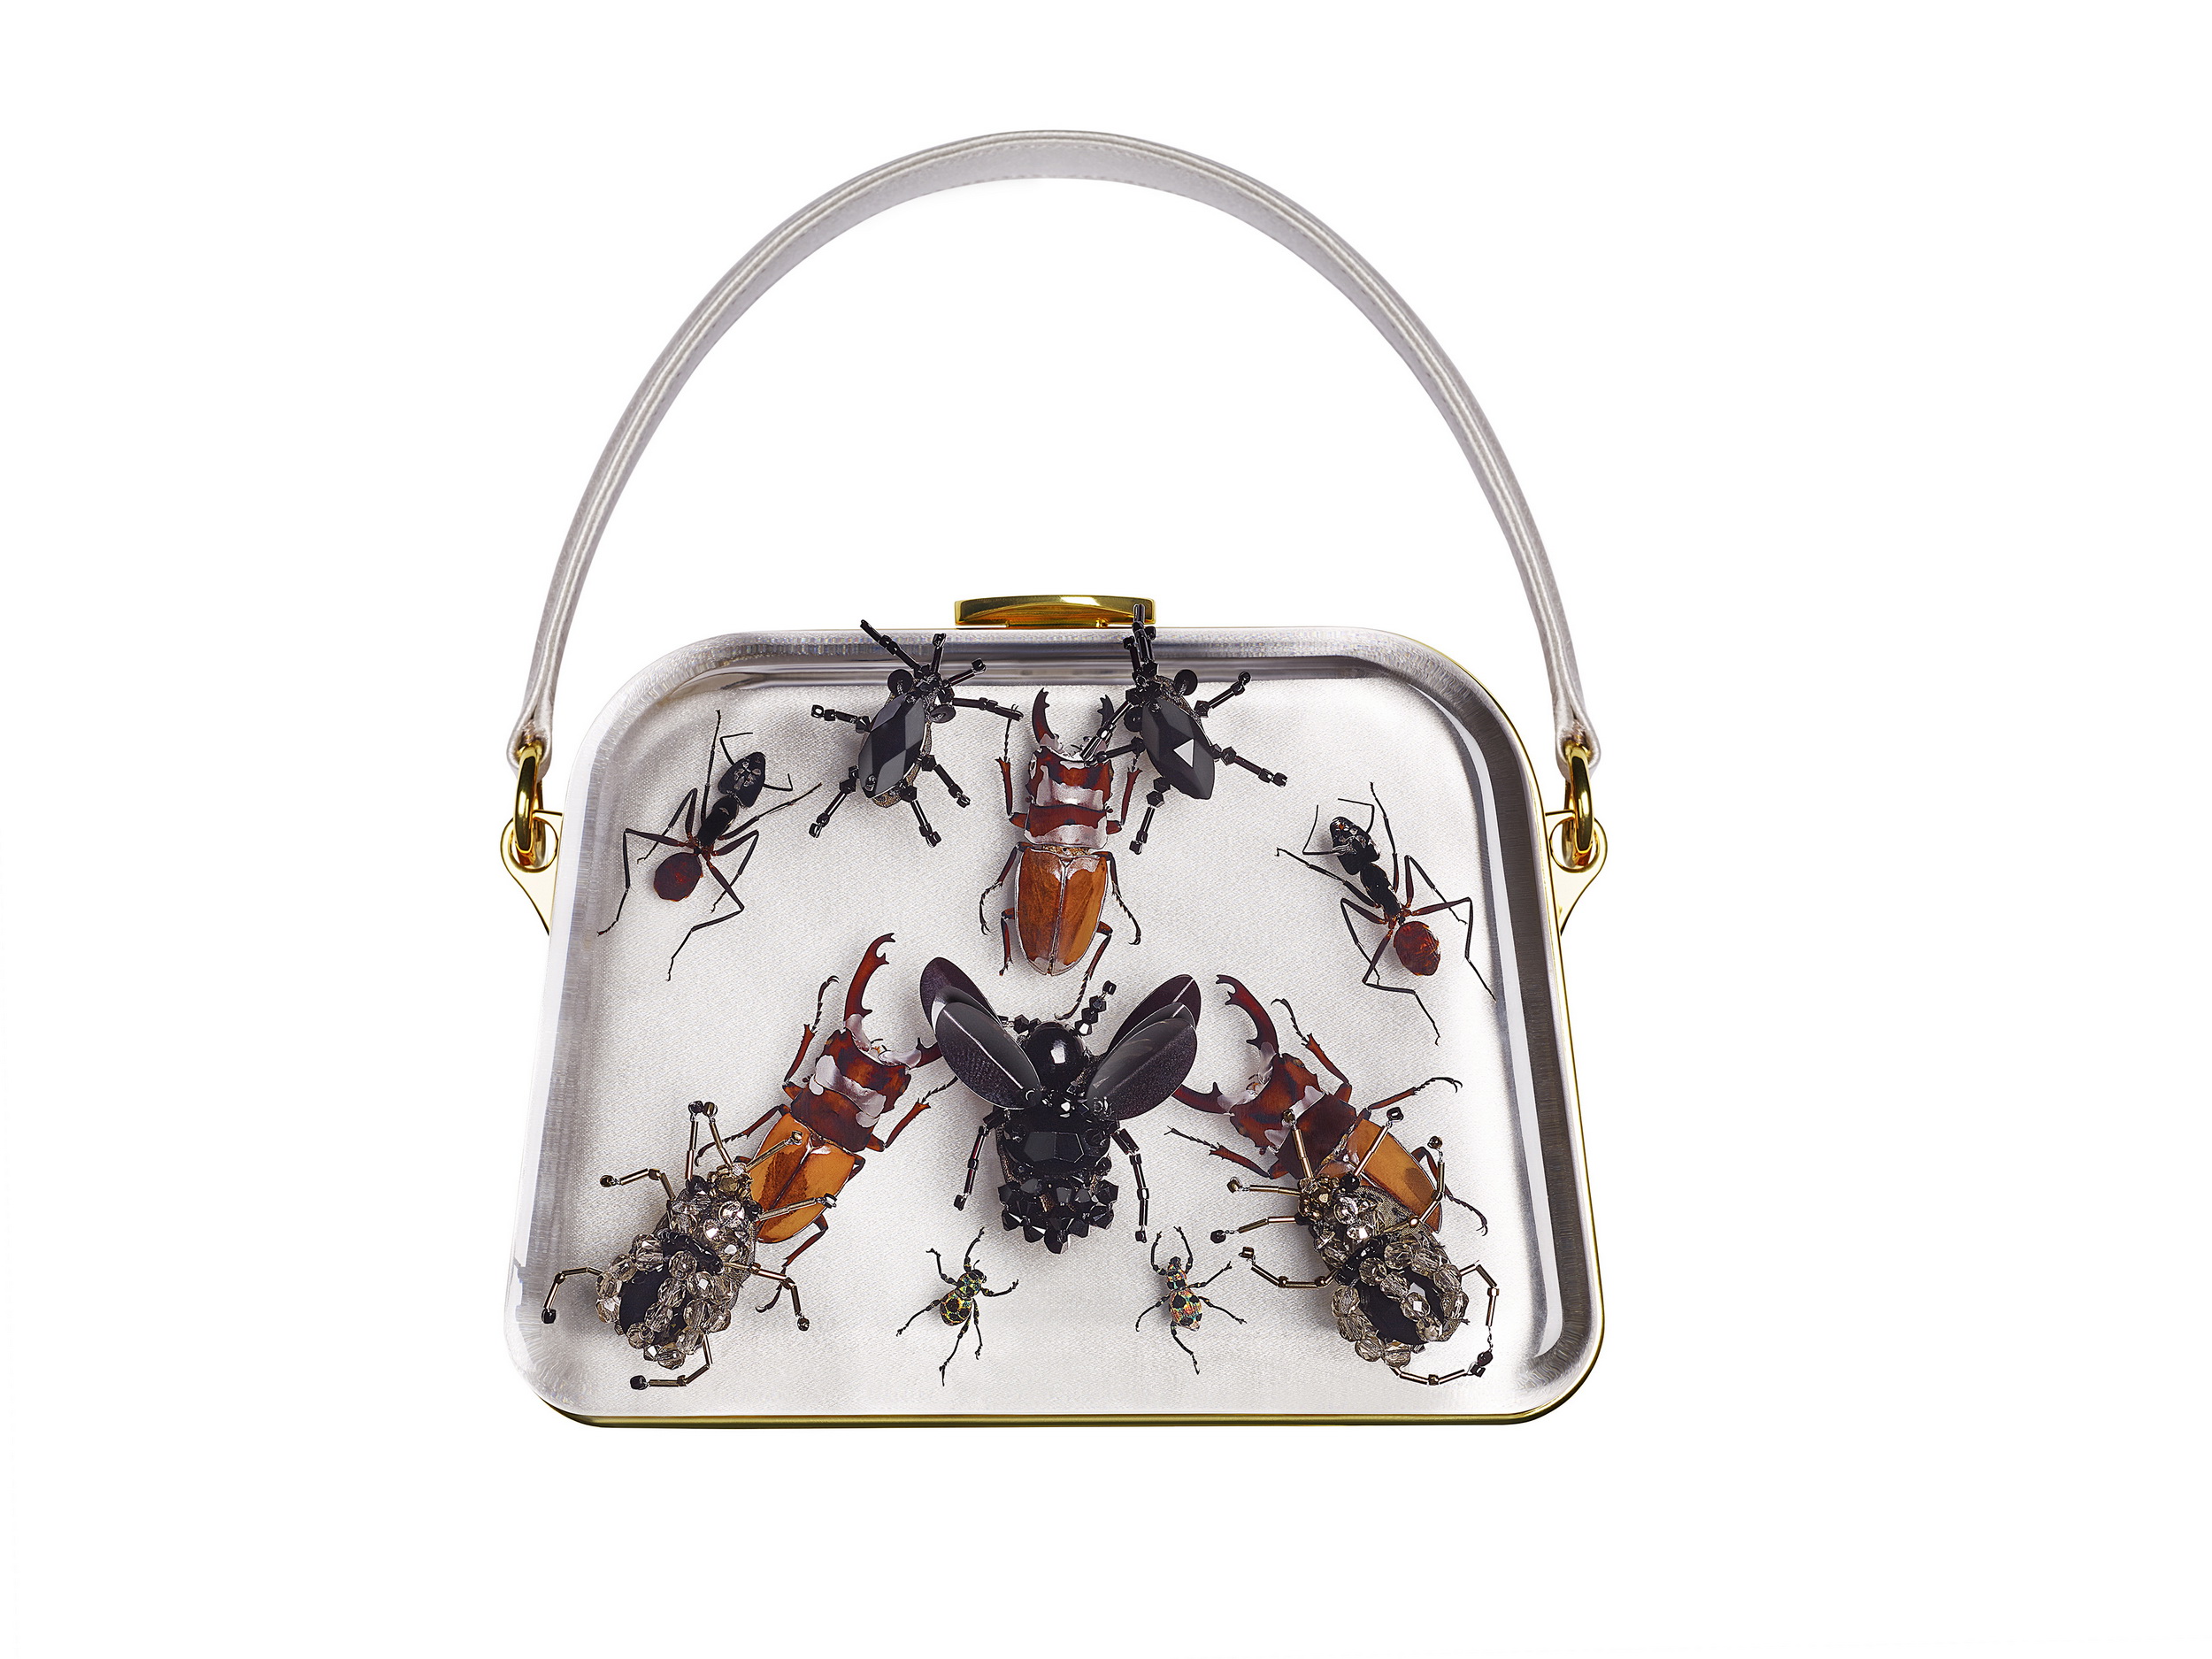 One of Hirst's Entomology bags